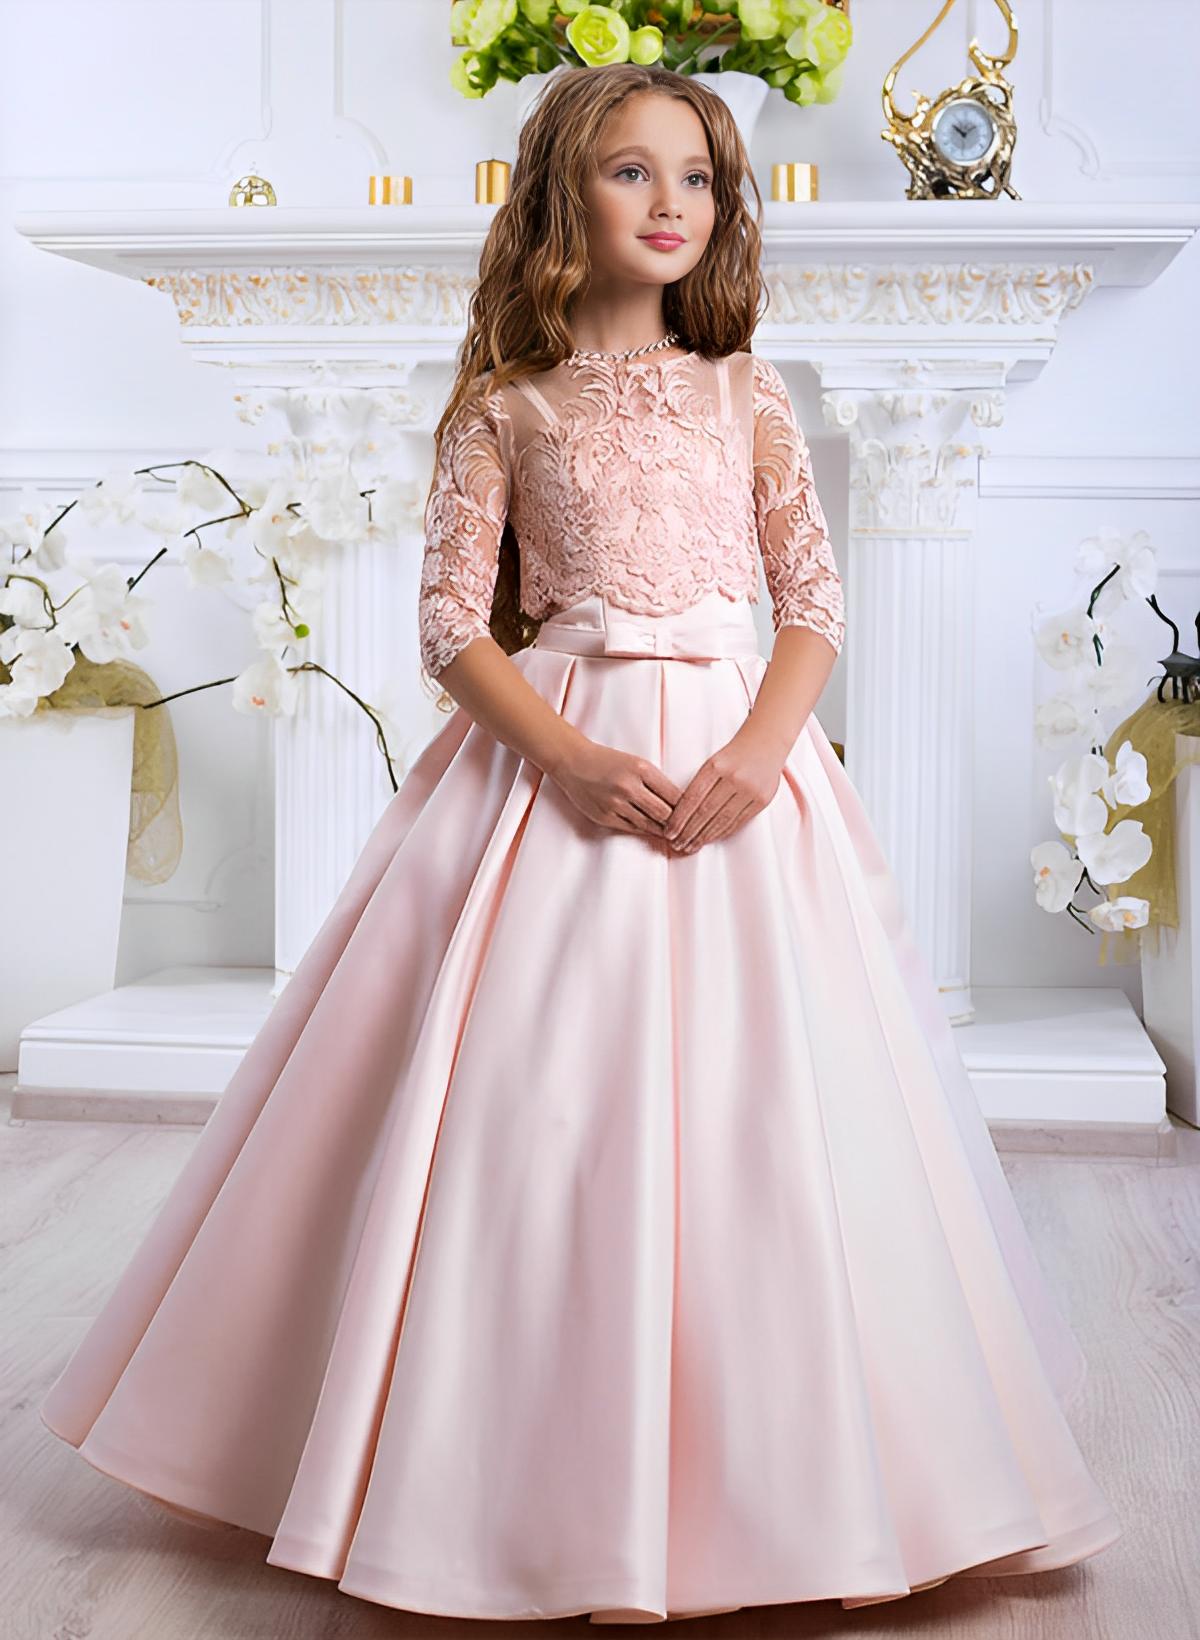 Ball-Gown/Princess Scoop Neck 3/4 Sleeves Satin Floor-length Flower Girl Dresses With Lace